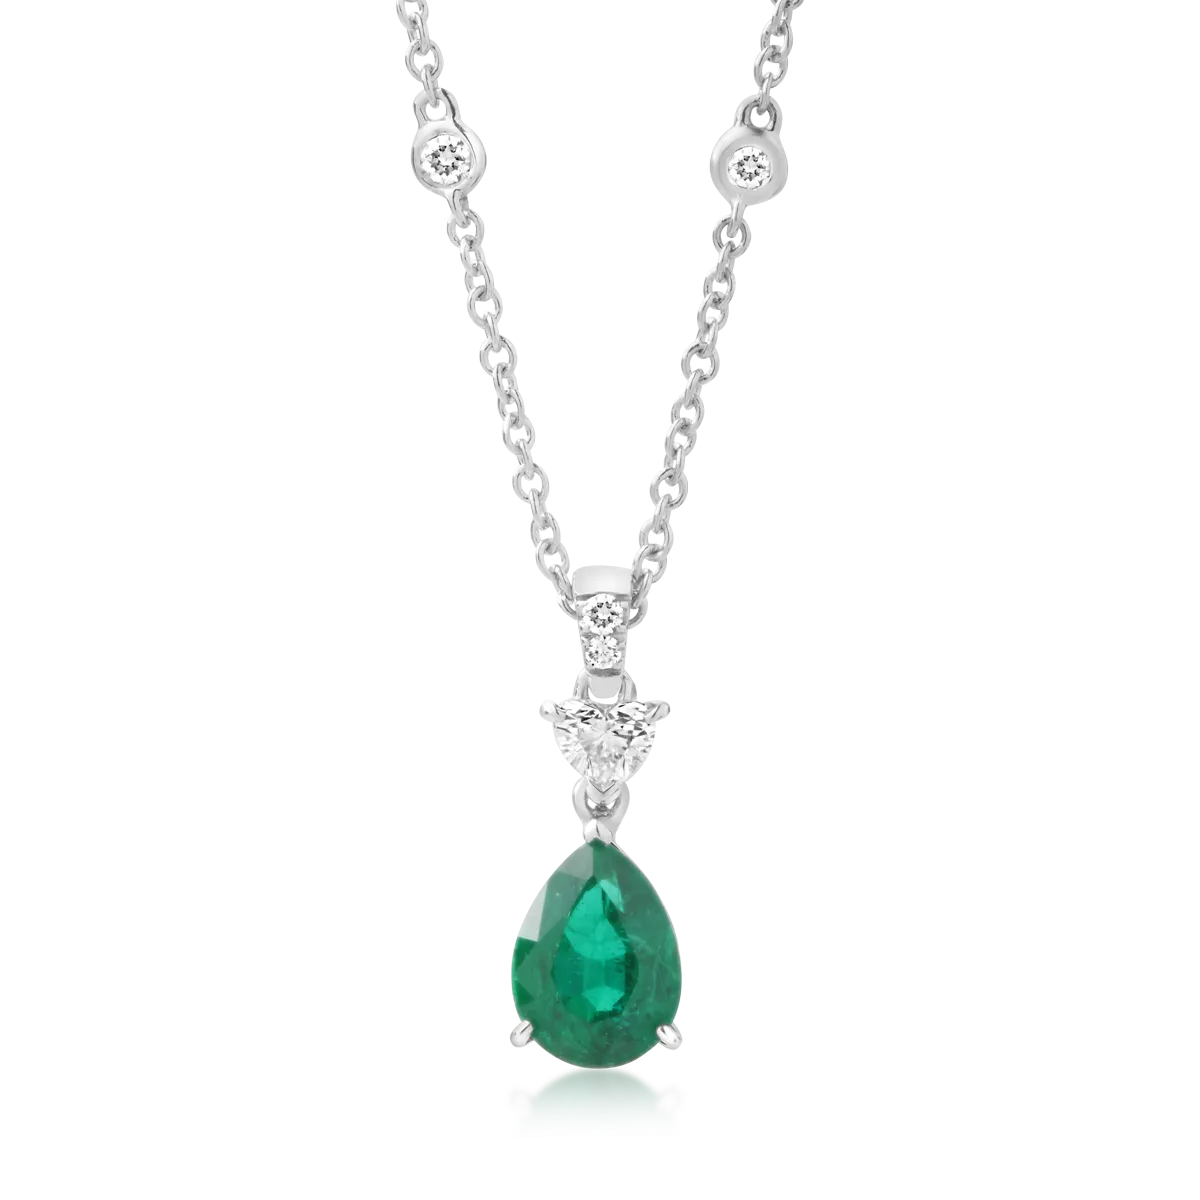 18K white gold pendant chain with 1.31ct emerald and 0.42ct diamonds